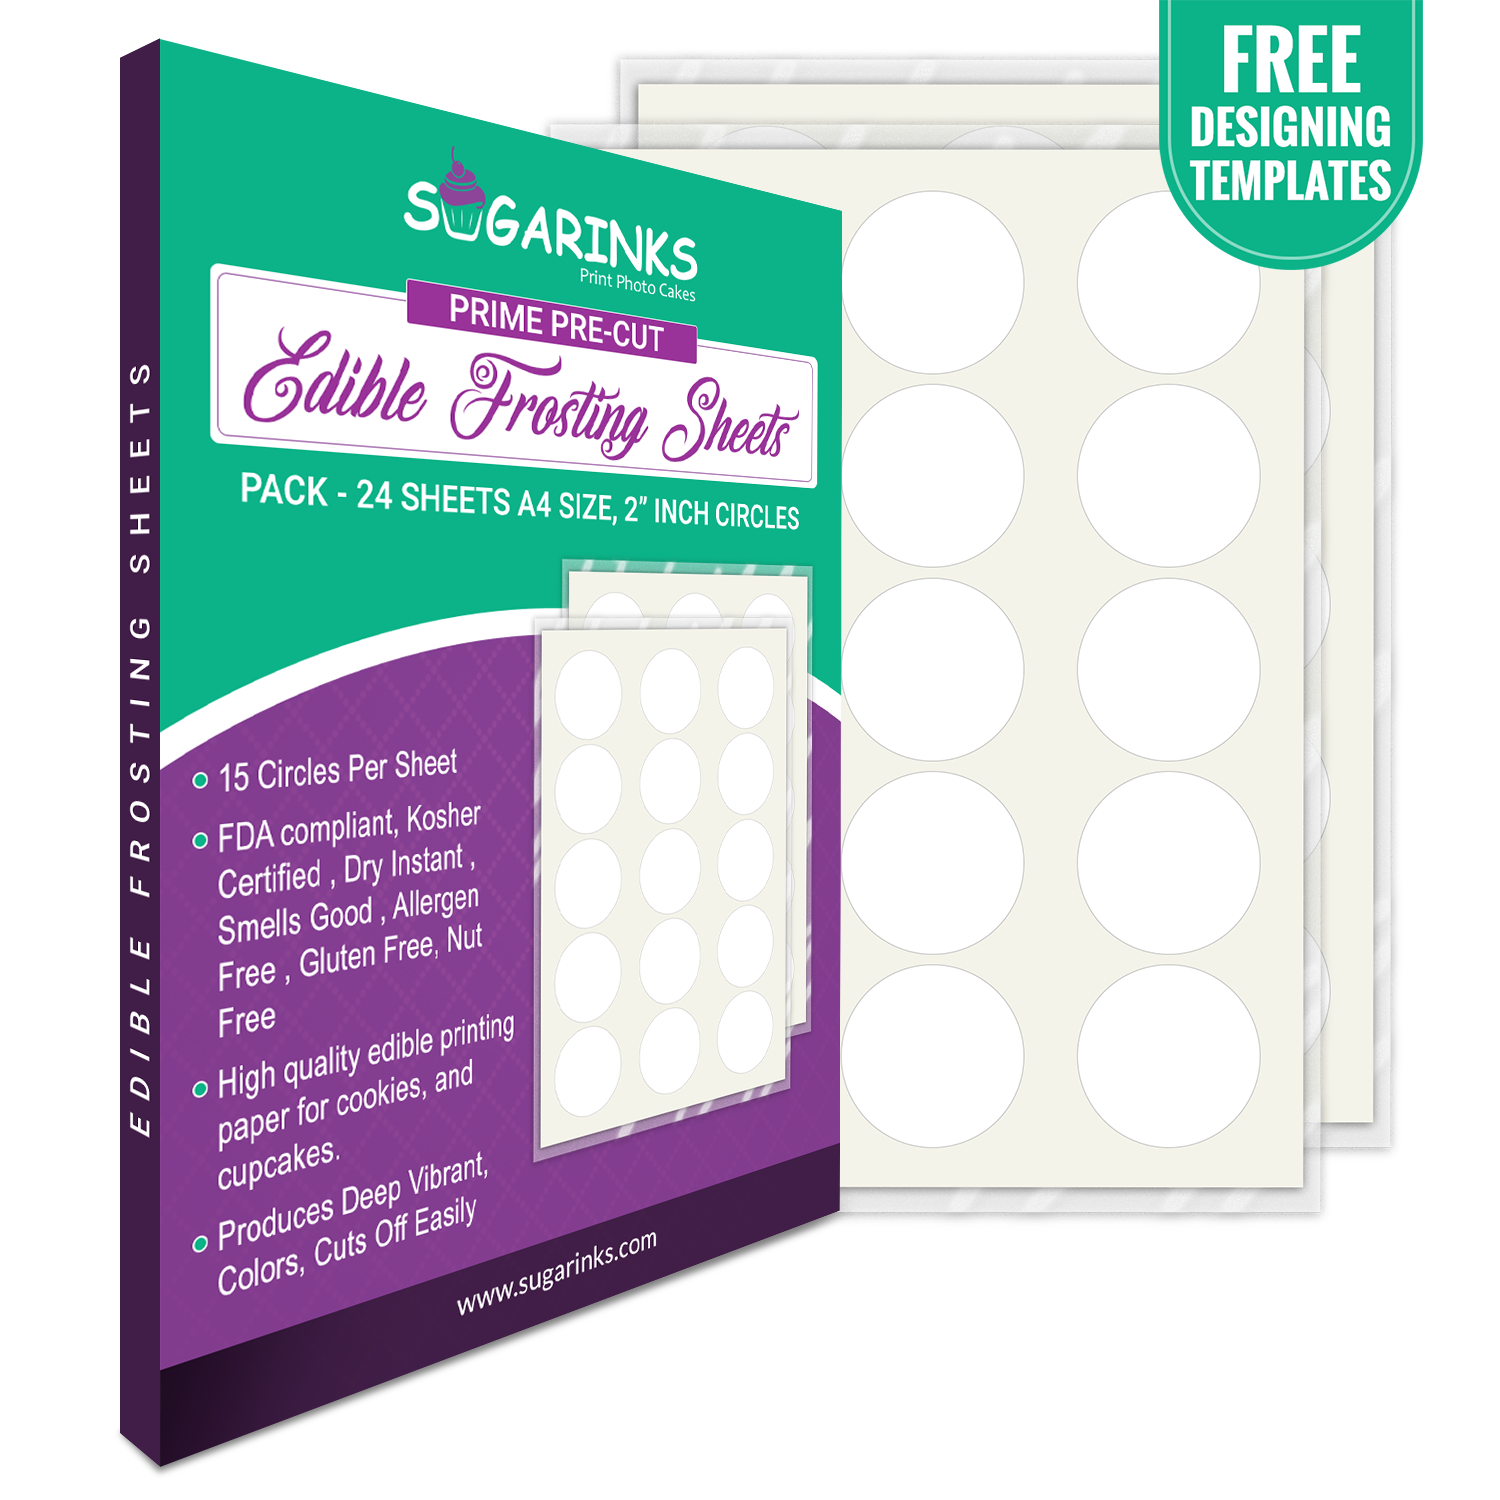 Sugarinks Premium Quality Pre-Cut Circles Frosting Sheets (2 inches, 15 Circles) - A4 Size, Pack of 24